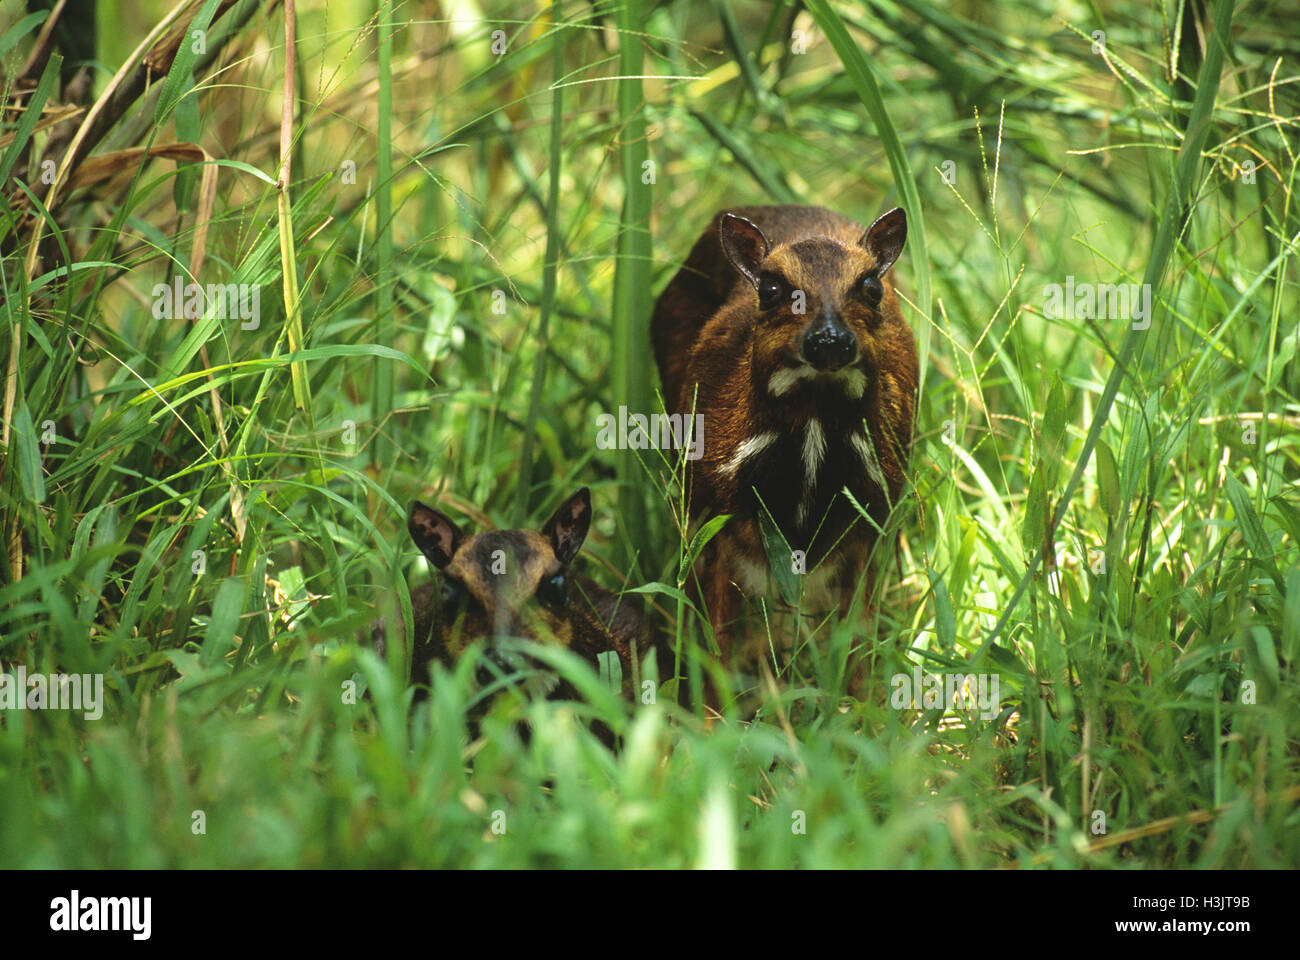 Philippine mouse deer (Tragulus nigricans) Stock Photo